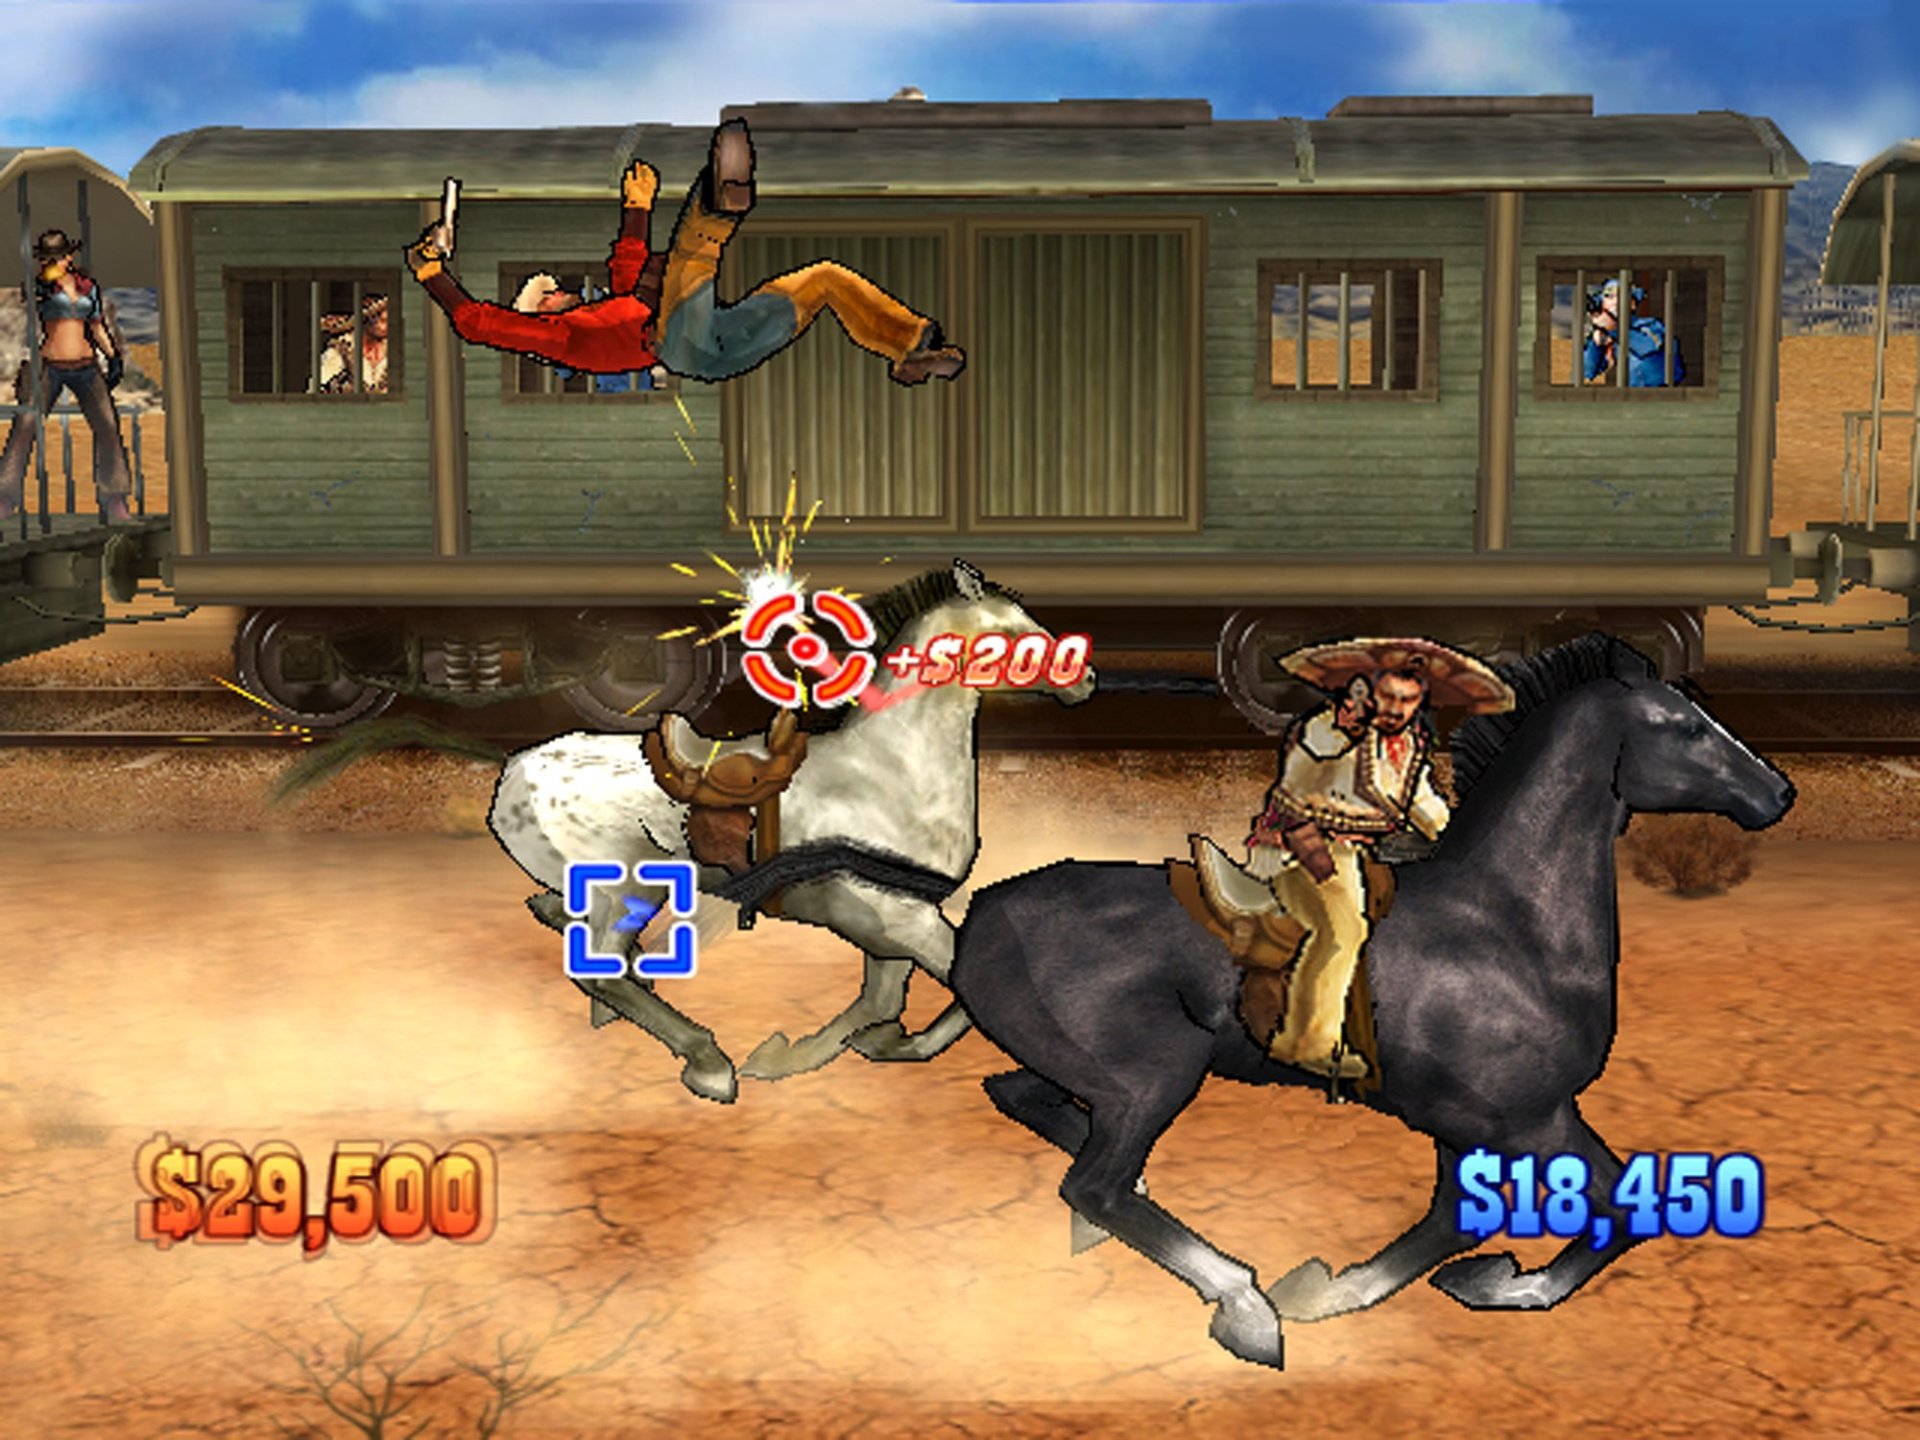 Wild West Guns Game Free Download For Pc